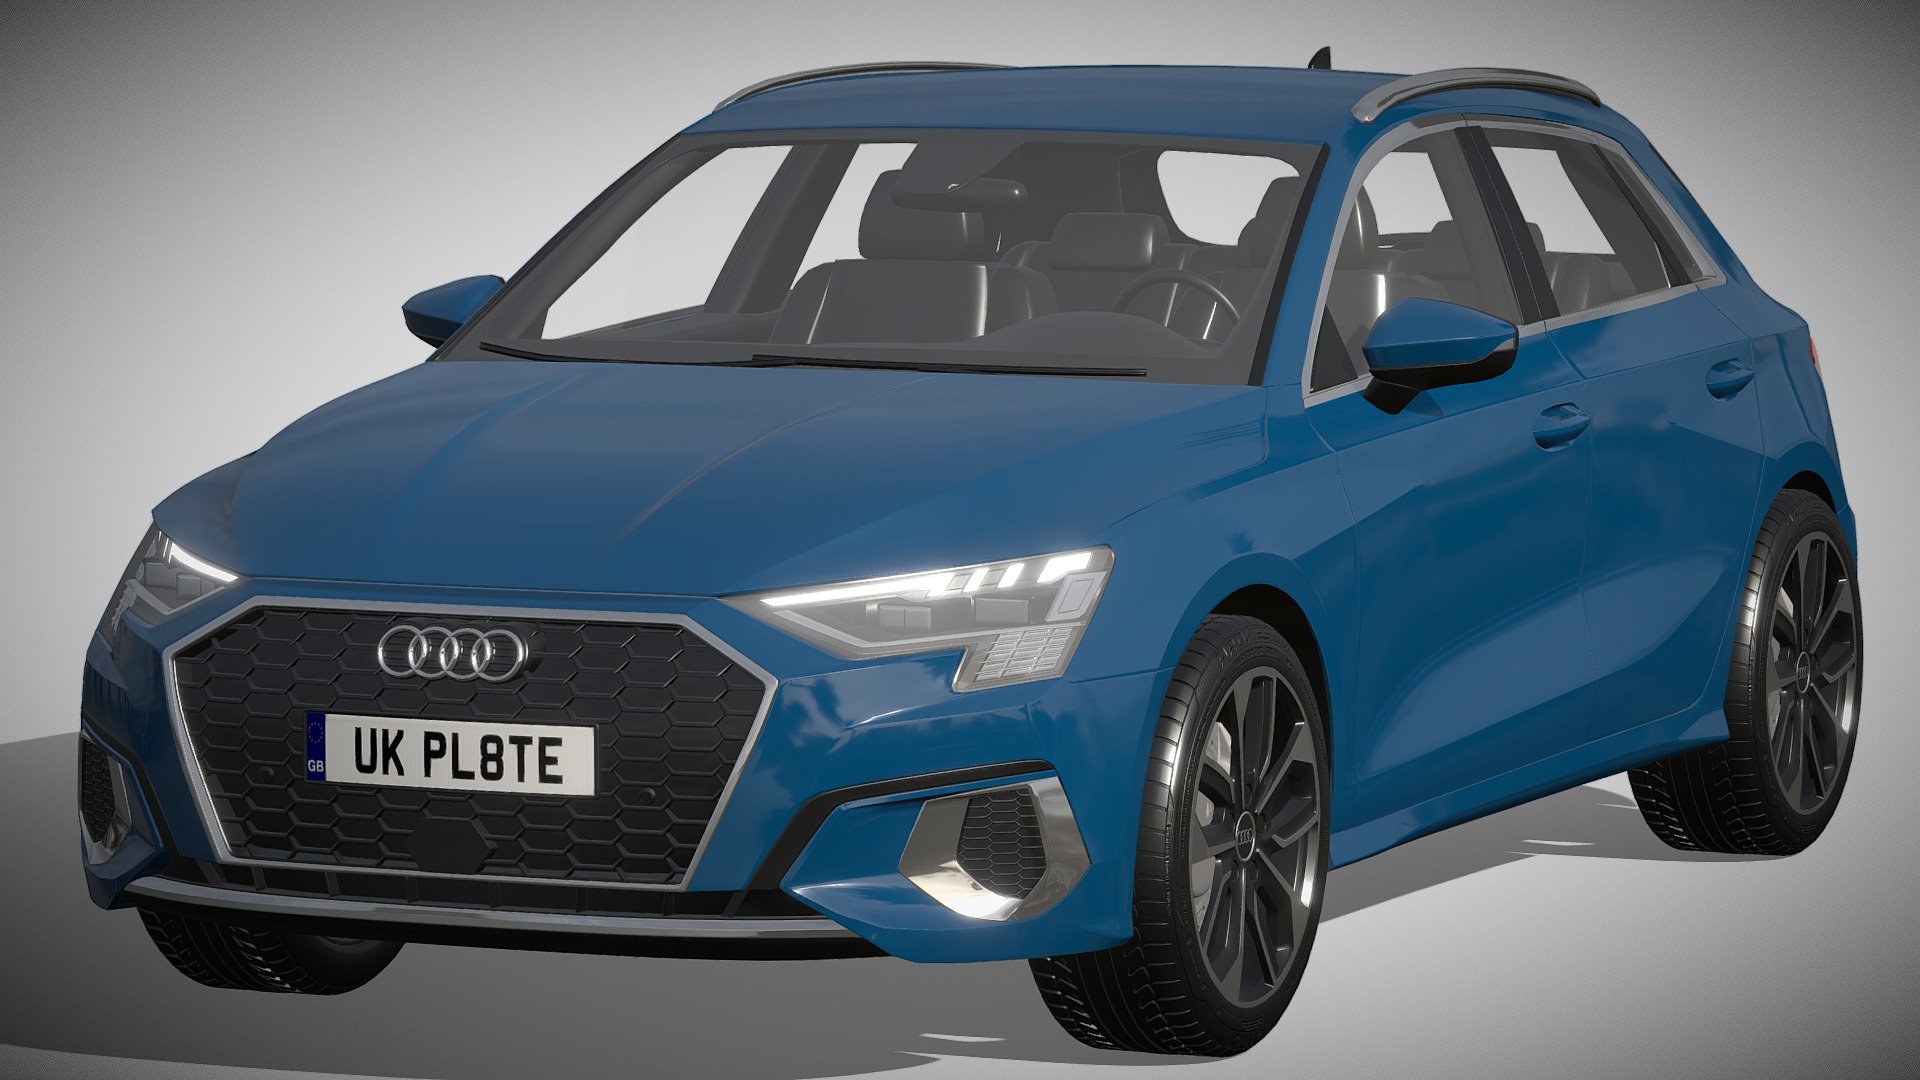 Audi A3 Sportback 2021

https://www.audi.de/de/brand/de/neuwagen/a3/a3-sportback.html

Clean geometry Light weight model, yet completely detailed for HI-Res renders. Use for movies, Advertisements or games

Corona render and materials

All textures include in *.rar files

Lighting setup is not included in the file! - Audi A3 Sportback 2021 - Buy Royalty Free 3D model by zifir3d 3d model